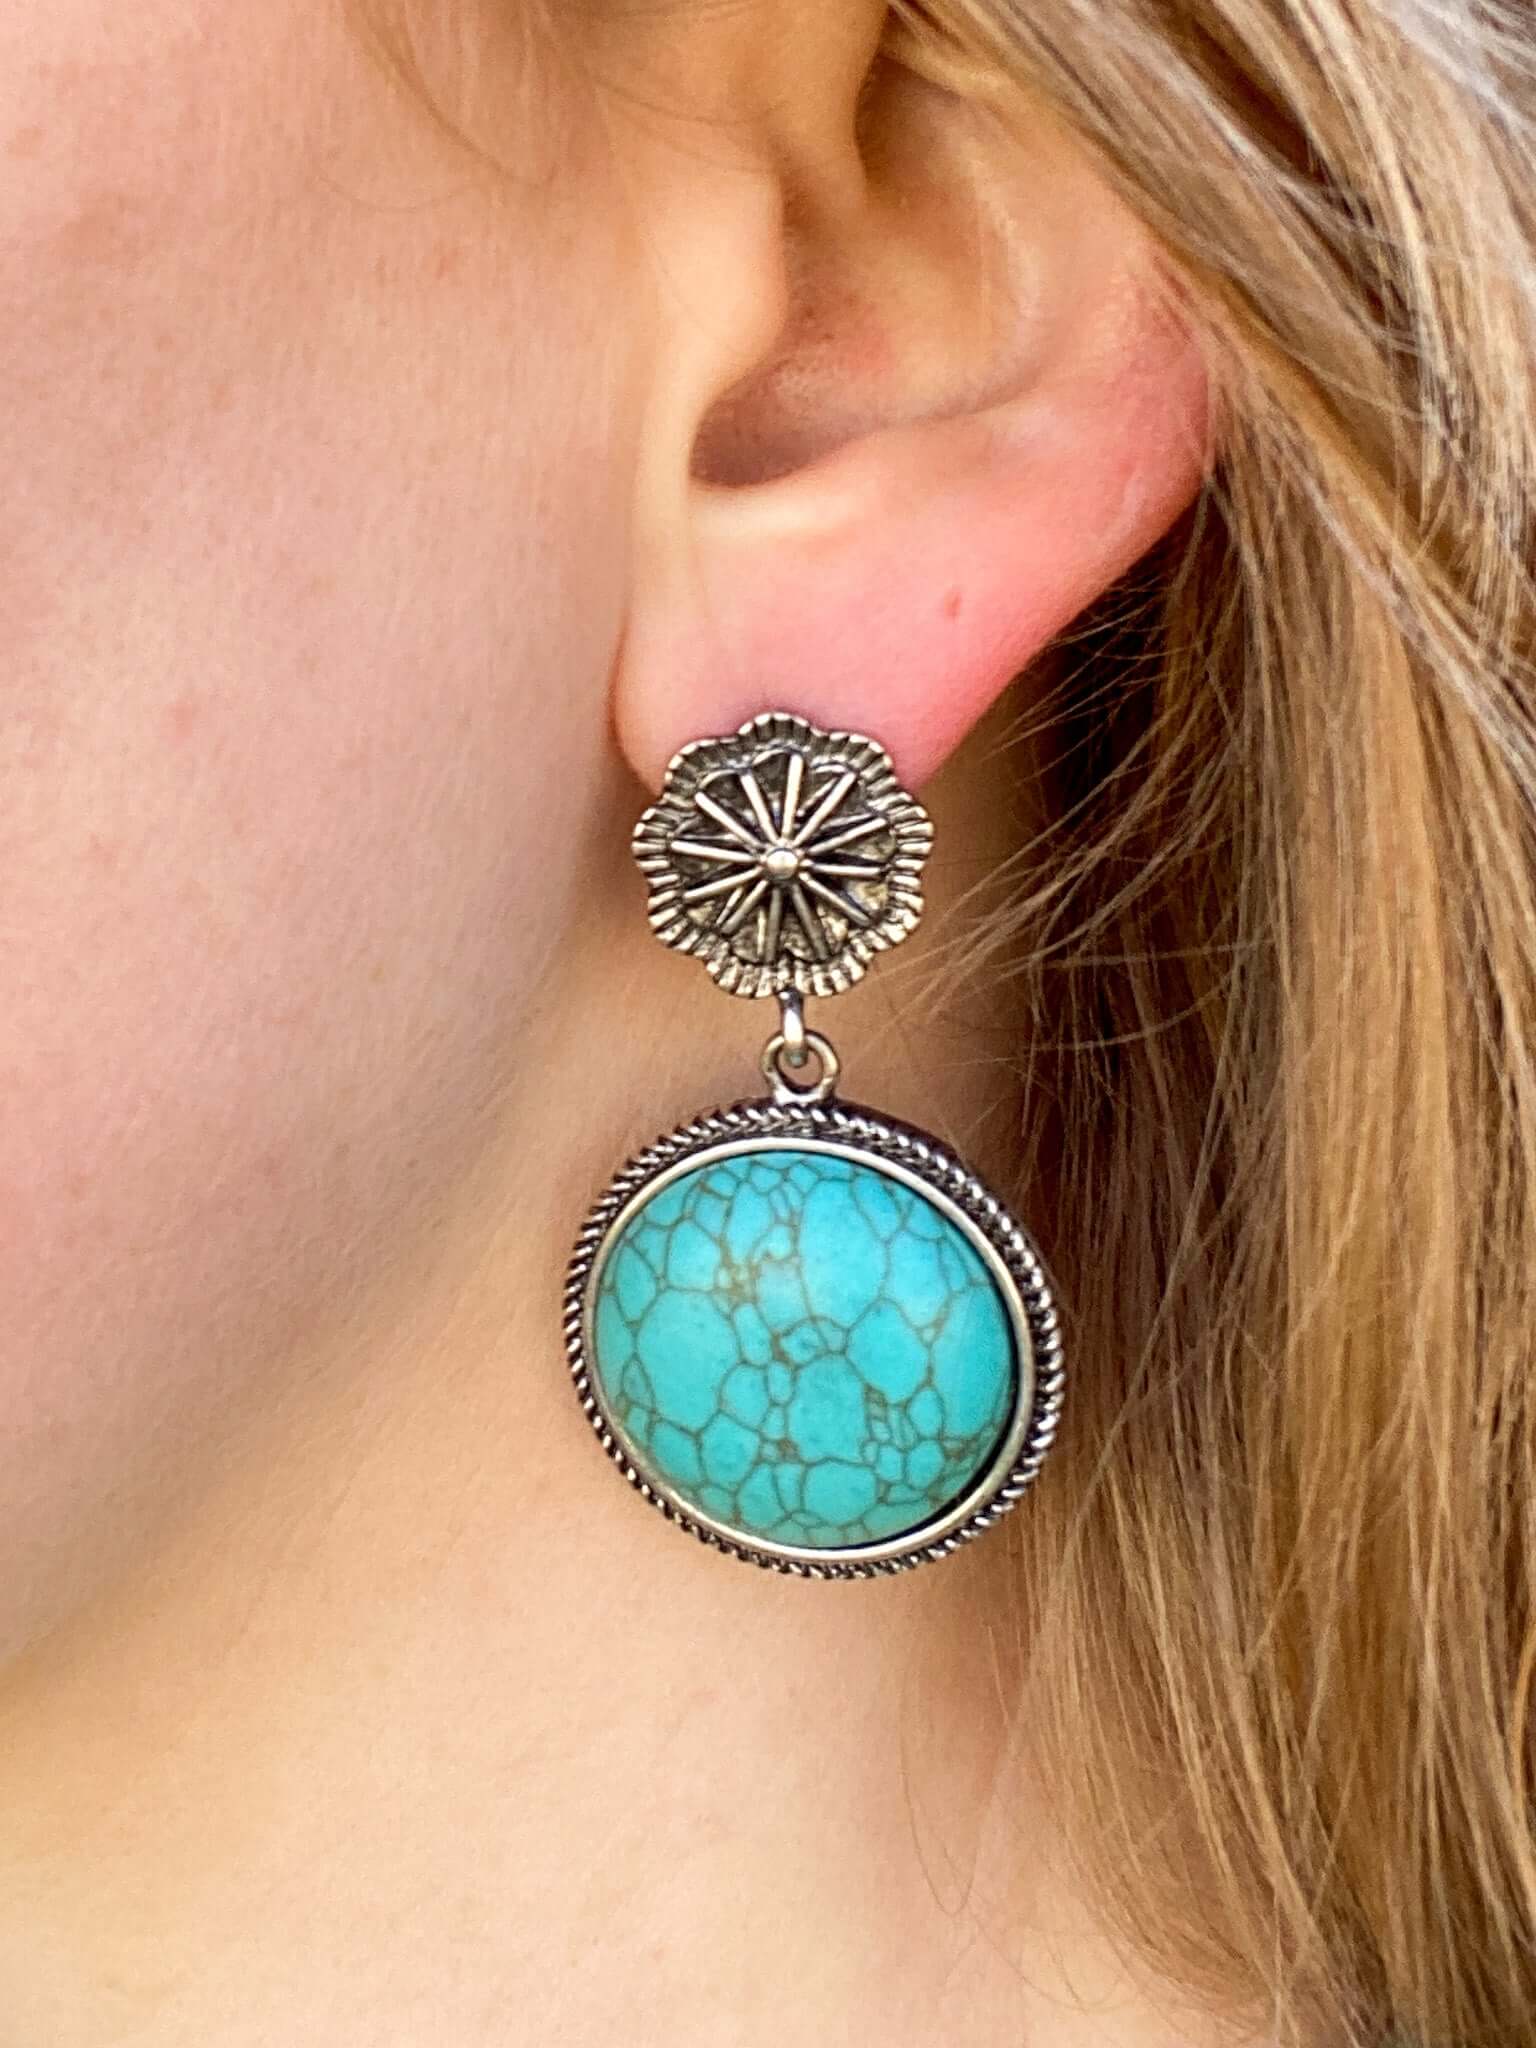 "Round turquoise" earrings